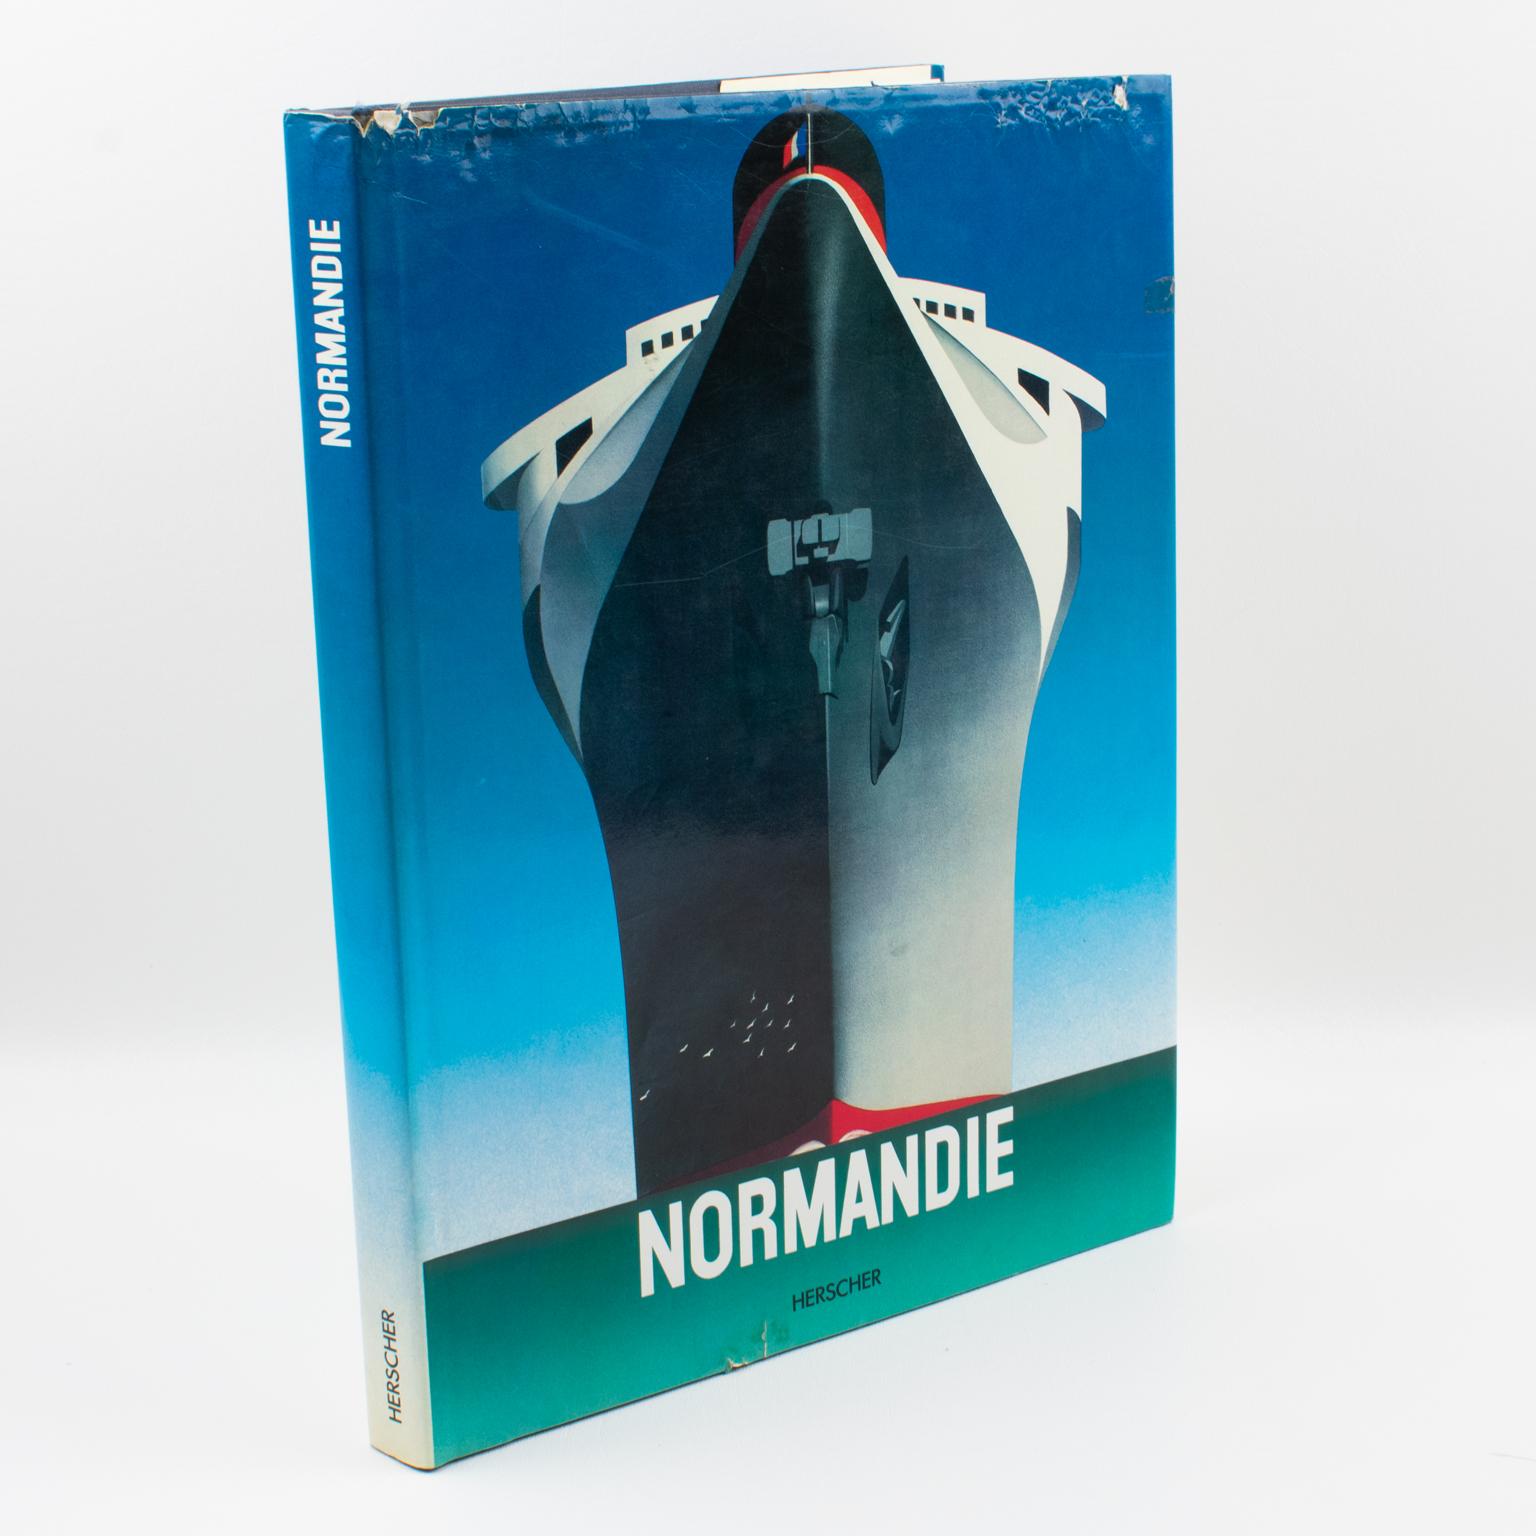 Normandie, L'Epopé du Géant des Mers, (The Normandie, the Epic of the Giant of Seas), French book by Bruno Foucart, 1985.
The Normandie, that French quality liner, also named Floating Exhibition or Steel Monster, was operated by the Transatlantic